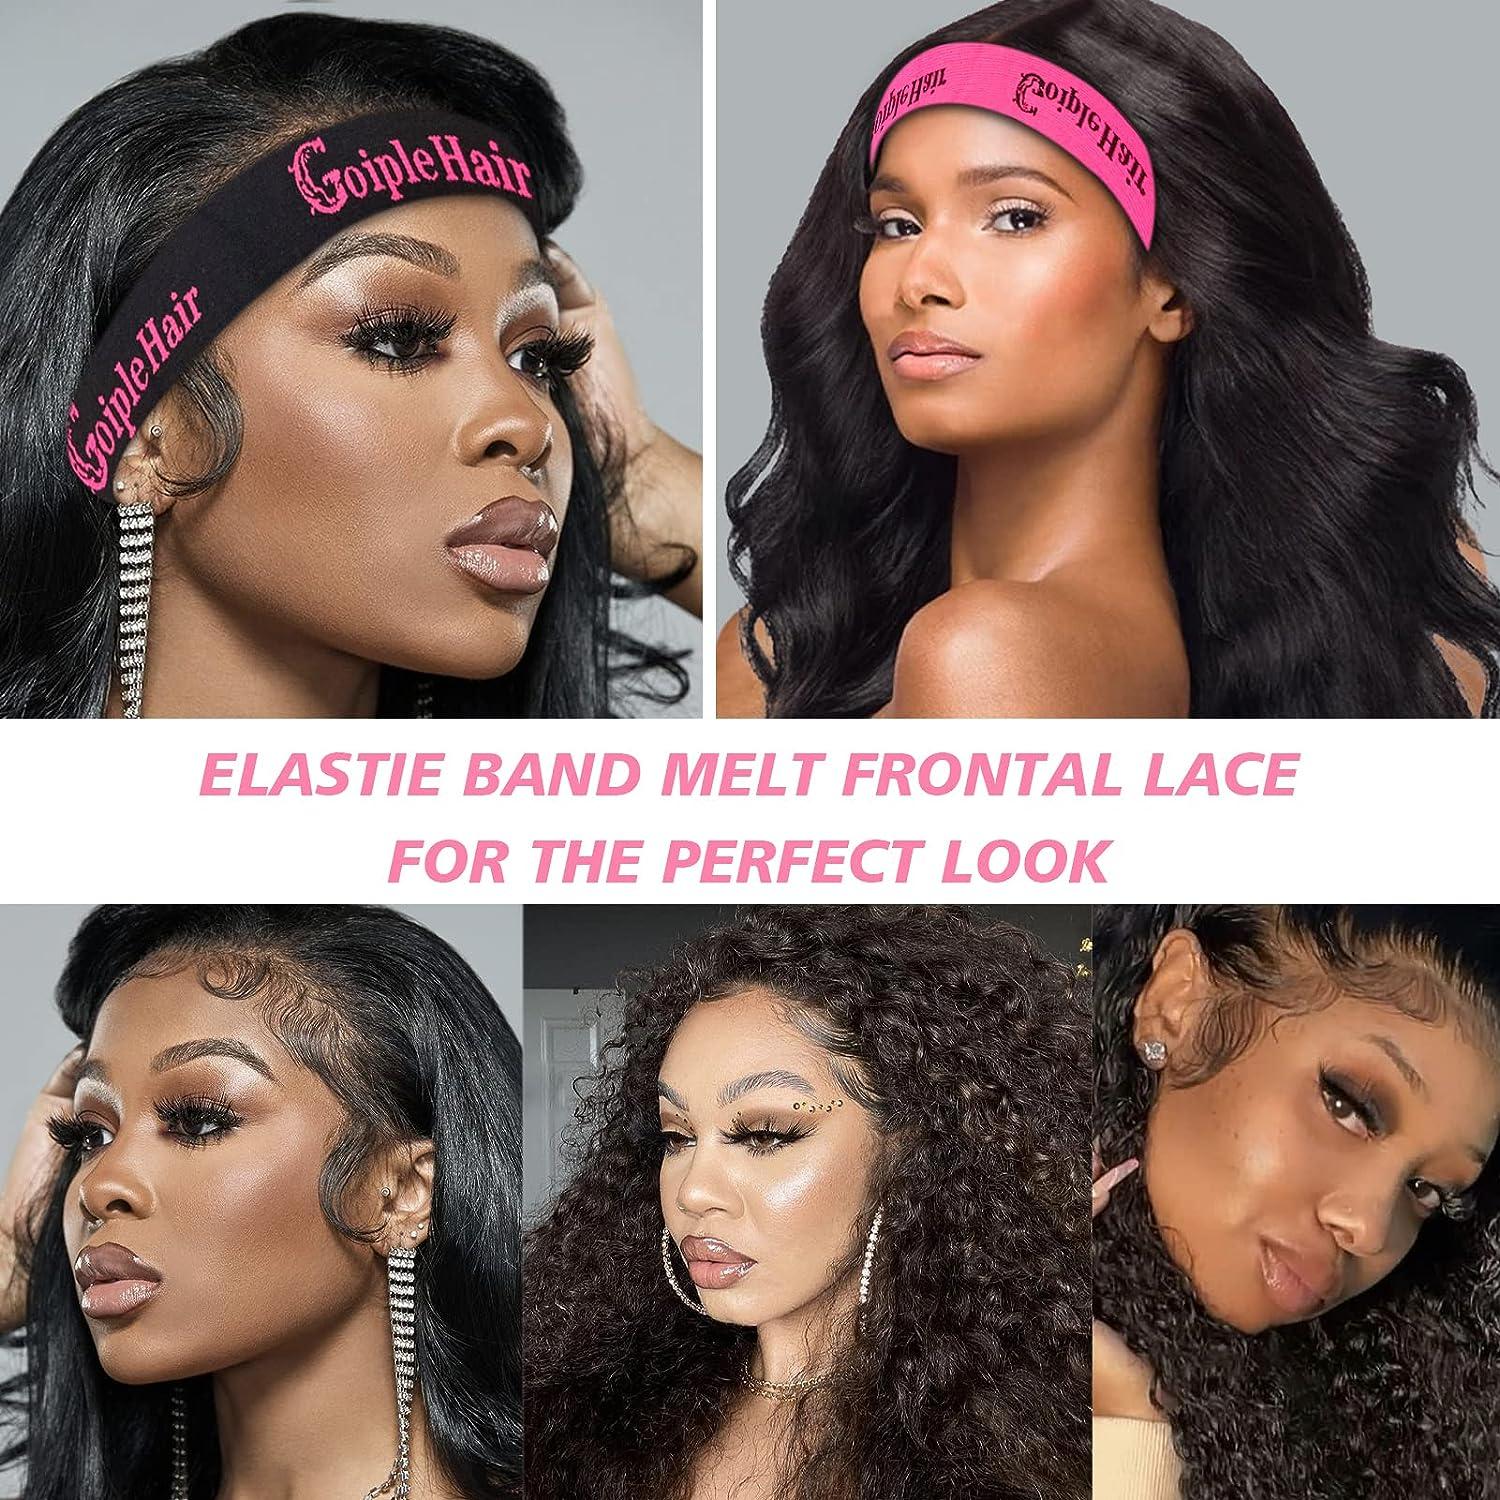 Elastic Band for Lace Frontal Melt, 4 PCS Lace Melting Band for Lace Wigs,  Wig Elastic Band for Melting Lace, Adjustable Wig Band for Edges, Lace Band